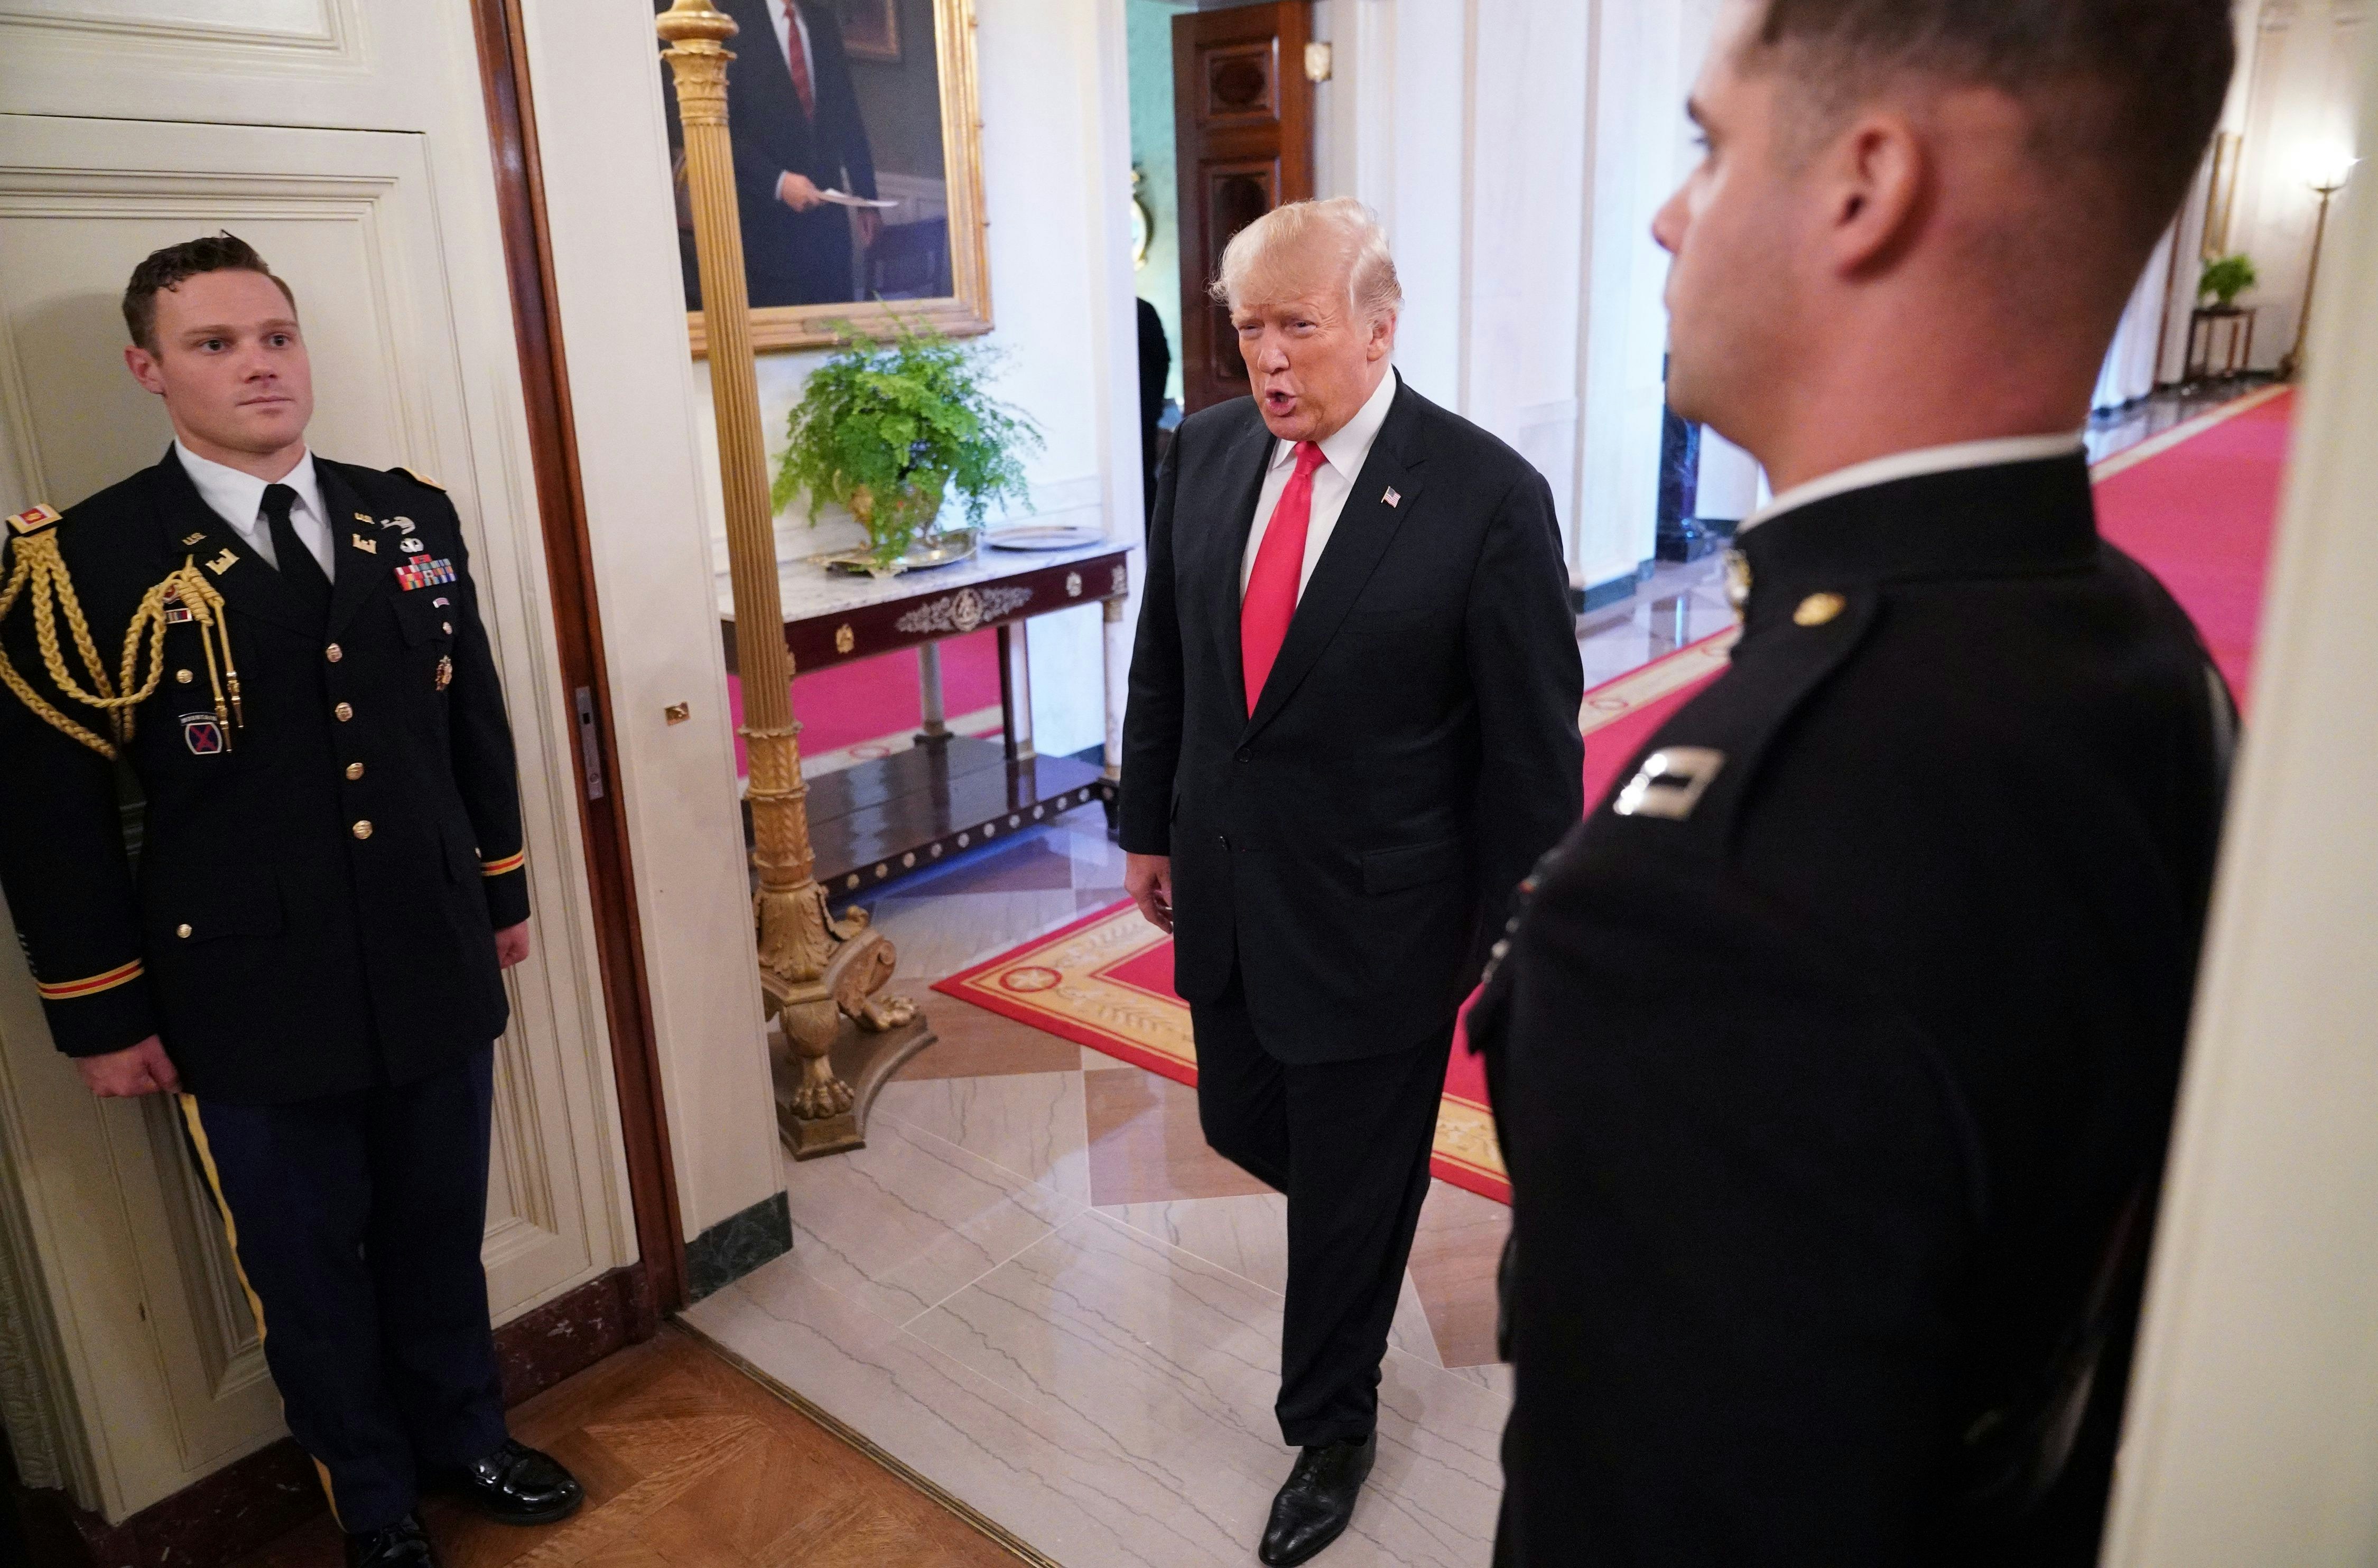 US President Donald Trump arrives for an event honoring the Immigration and Customs Enforcement and Customs and Border Protection services in the East Room of the White House in Washington, DC on August 20, 2018. (Photo by MANDEL NGAN / AFP)        (Photo credit should read MANDEL NGAN/AFP/Getty Images)